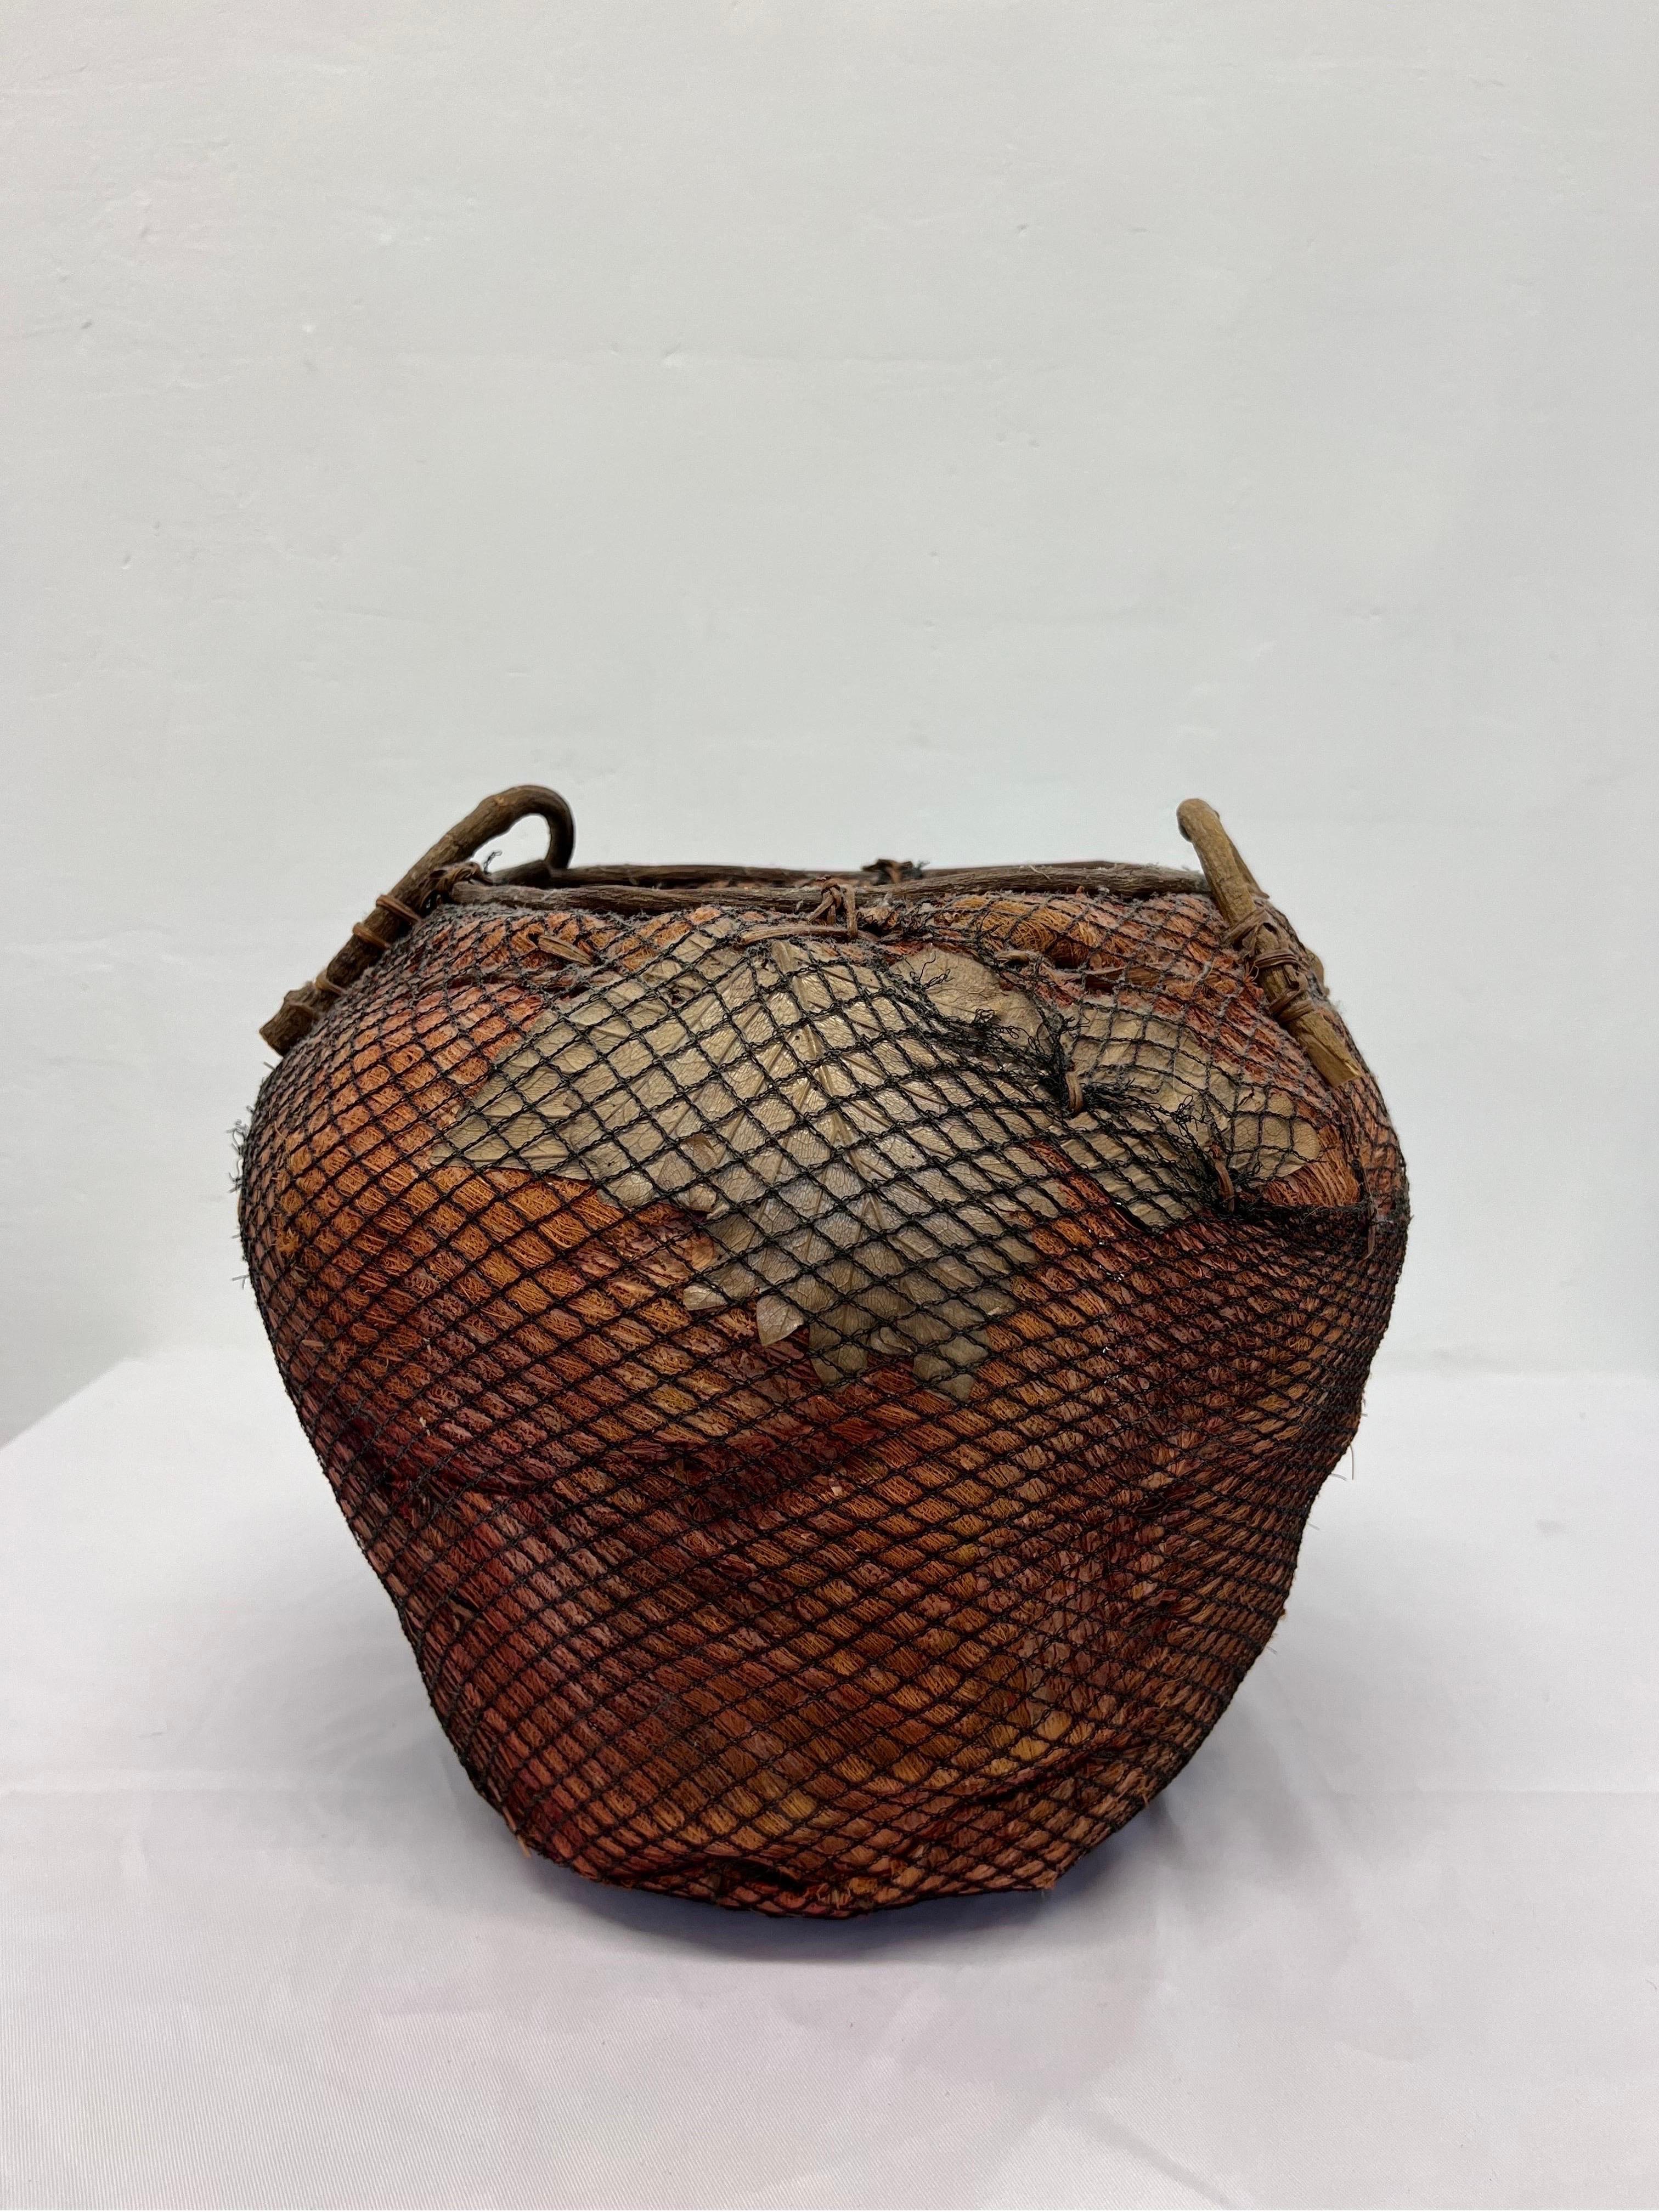 Handmade Natural Fiber and Leaf Basket Wrapped in Fish Net, 1970s In Good Condition For Sale In Miami, FL